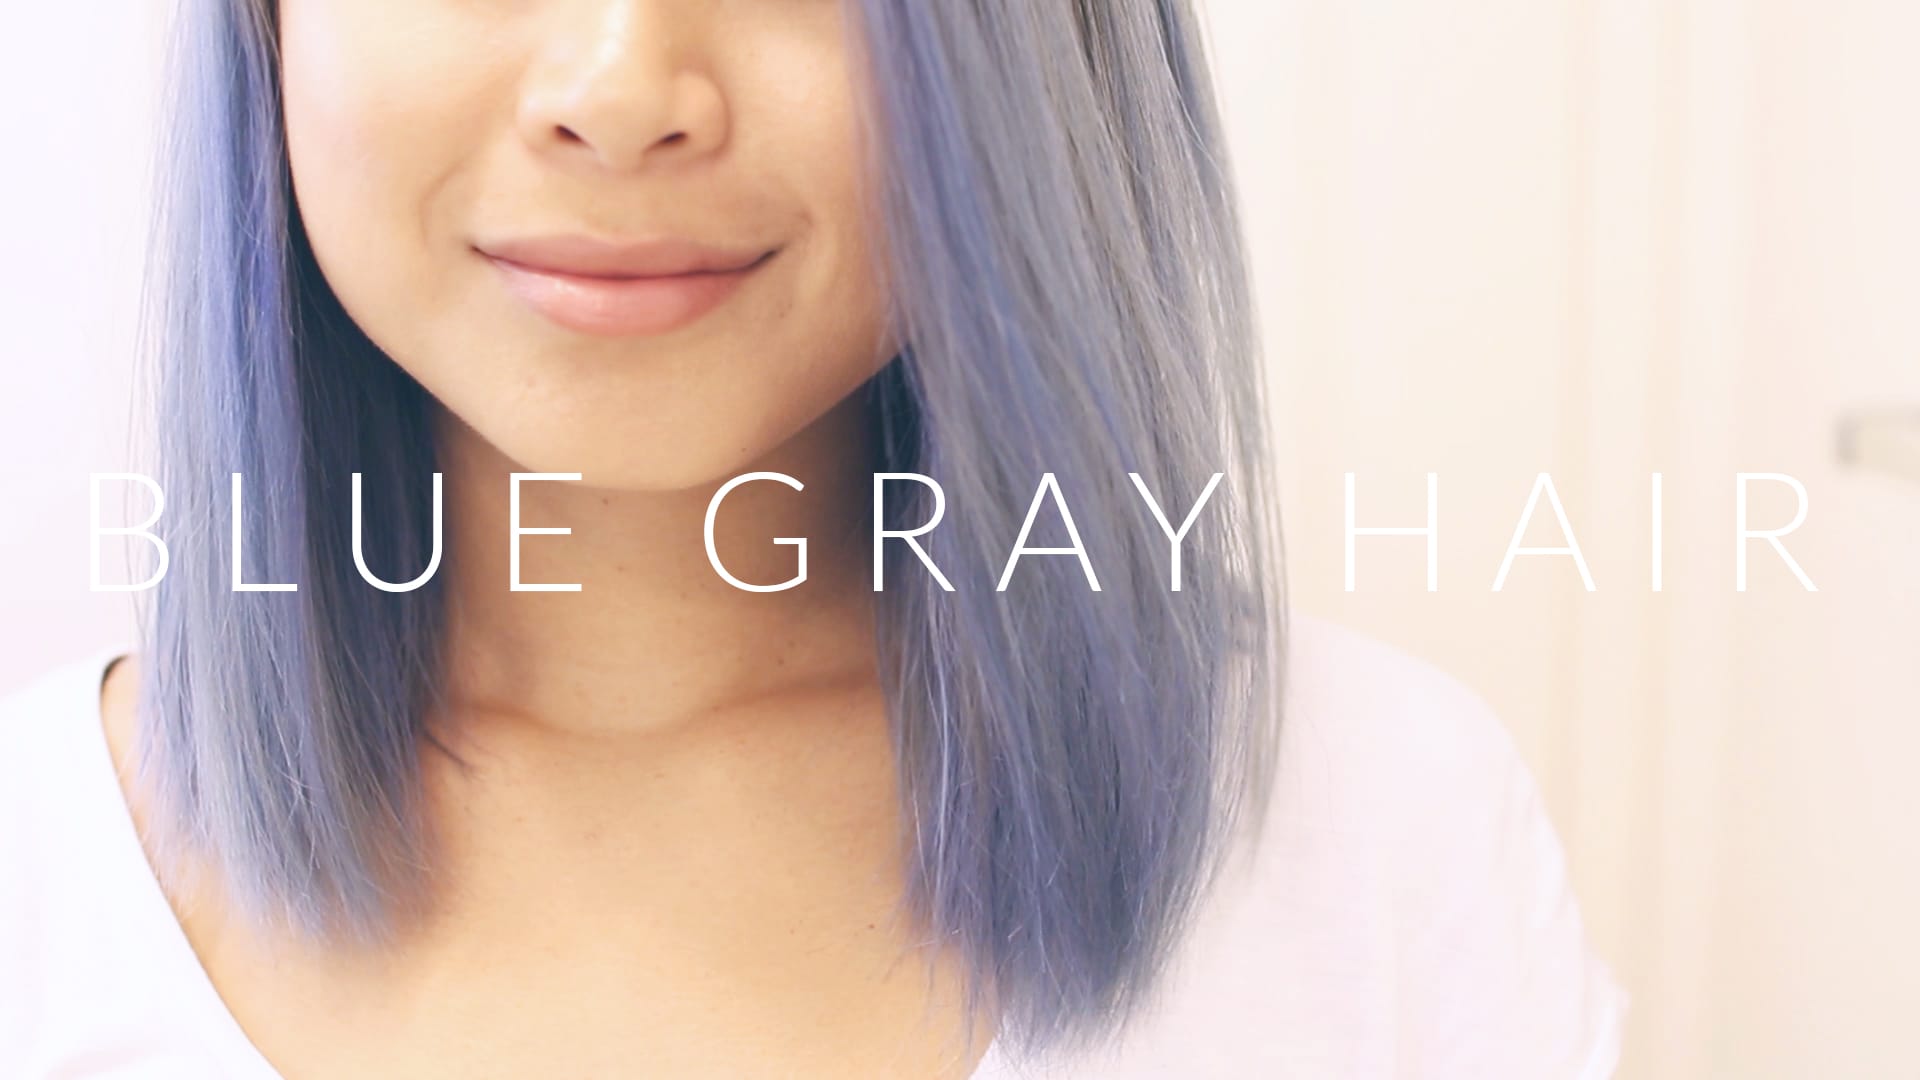 7. "Step-by-Step Tutorial for a Blue and Gray Ombre Hair Transformation" - wide 7